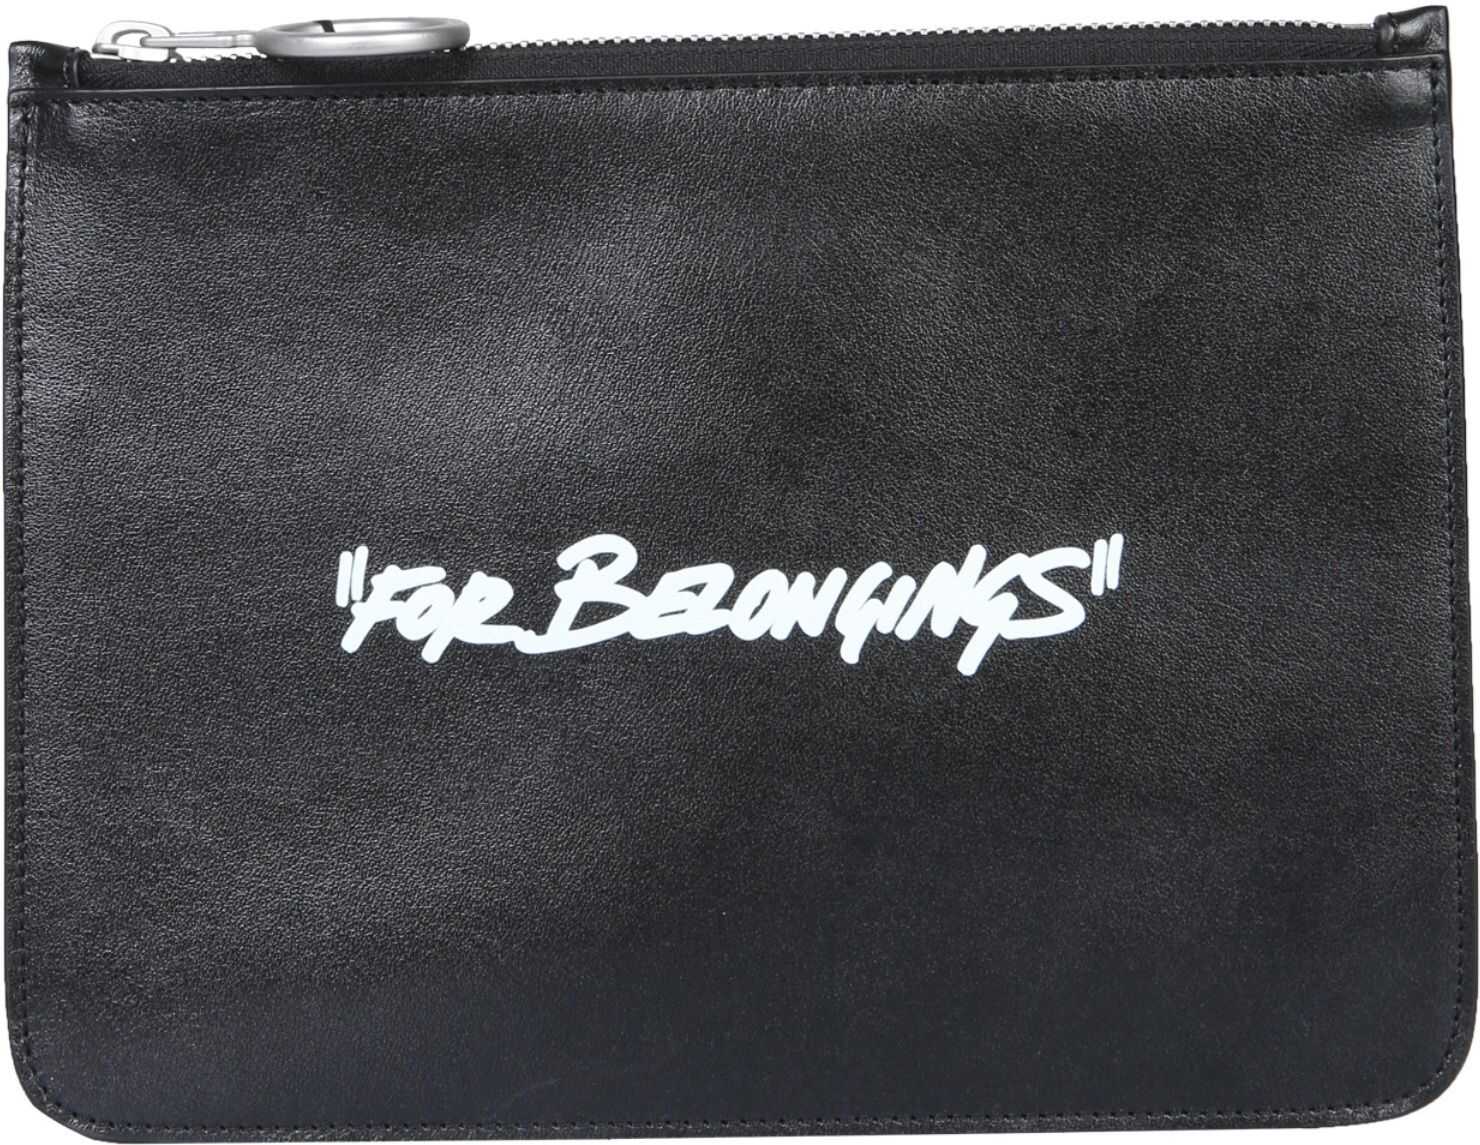 "Quote" Pouch